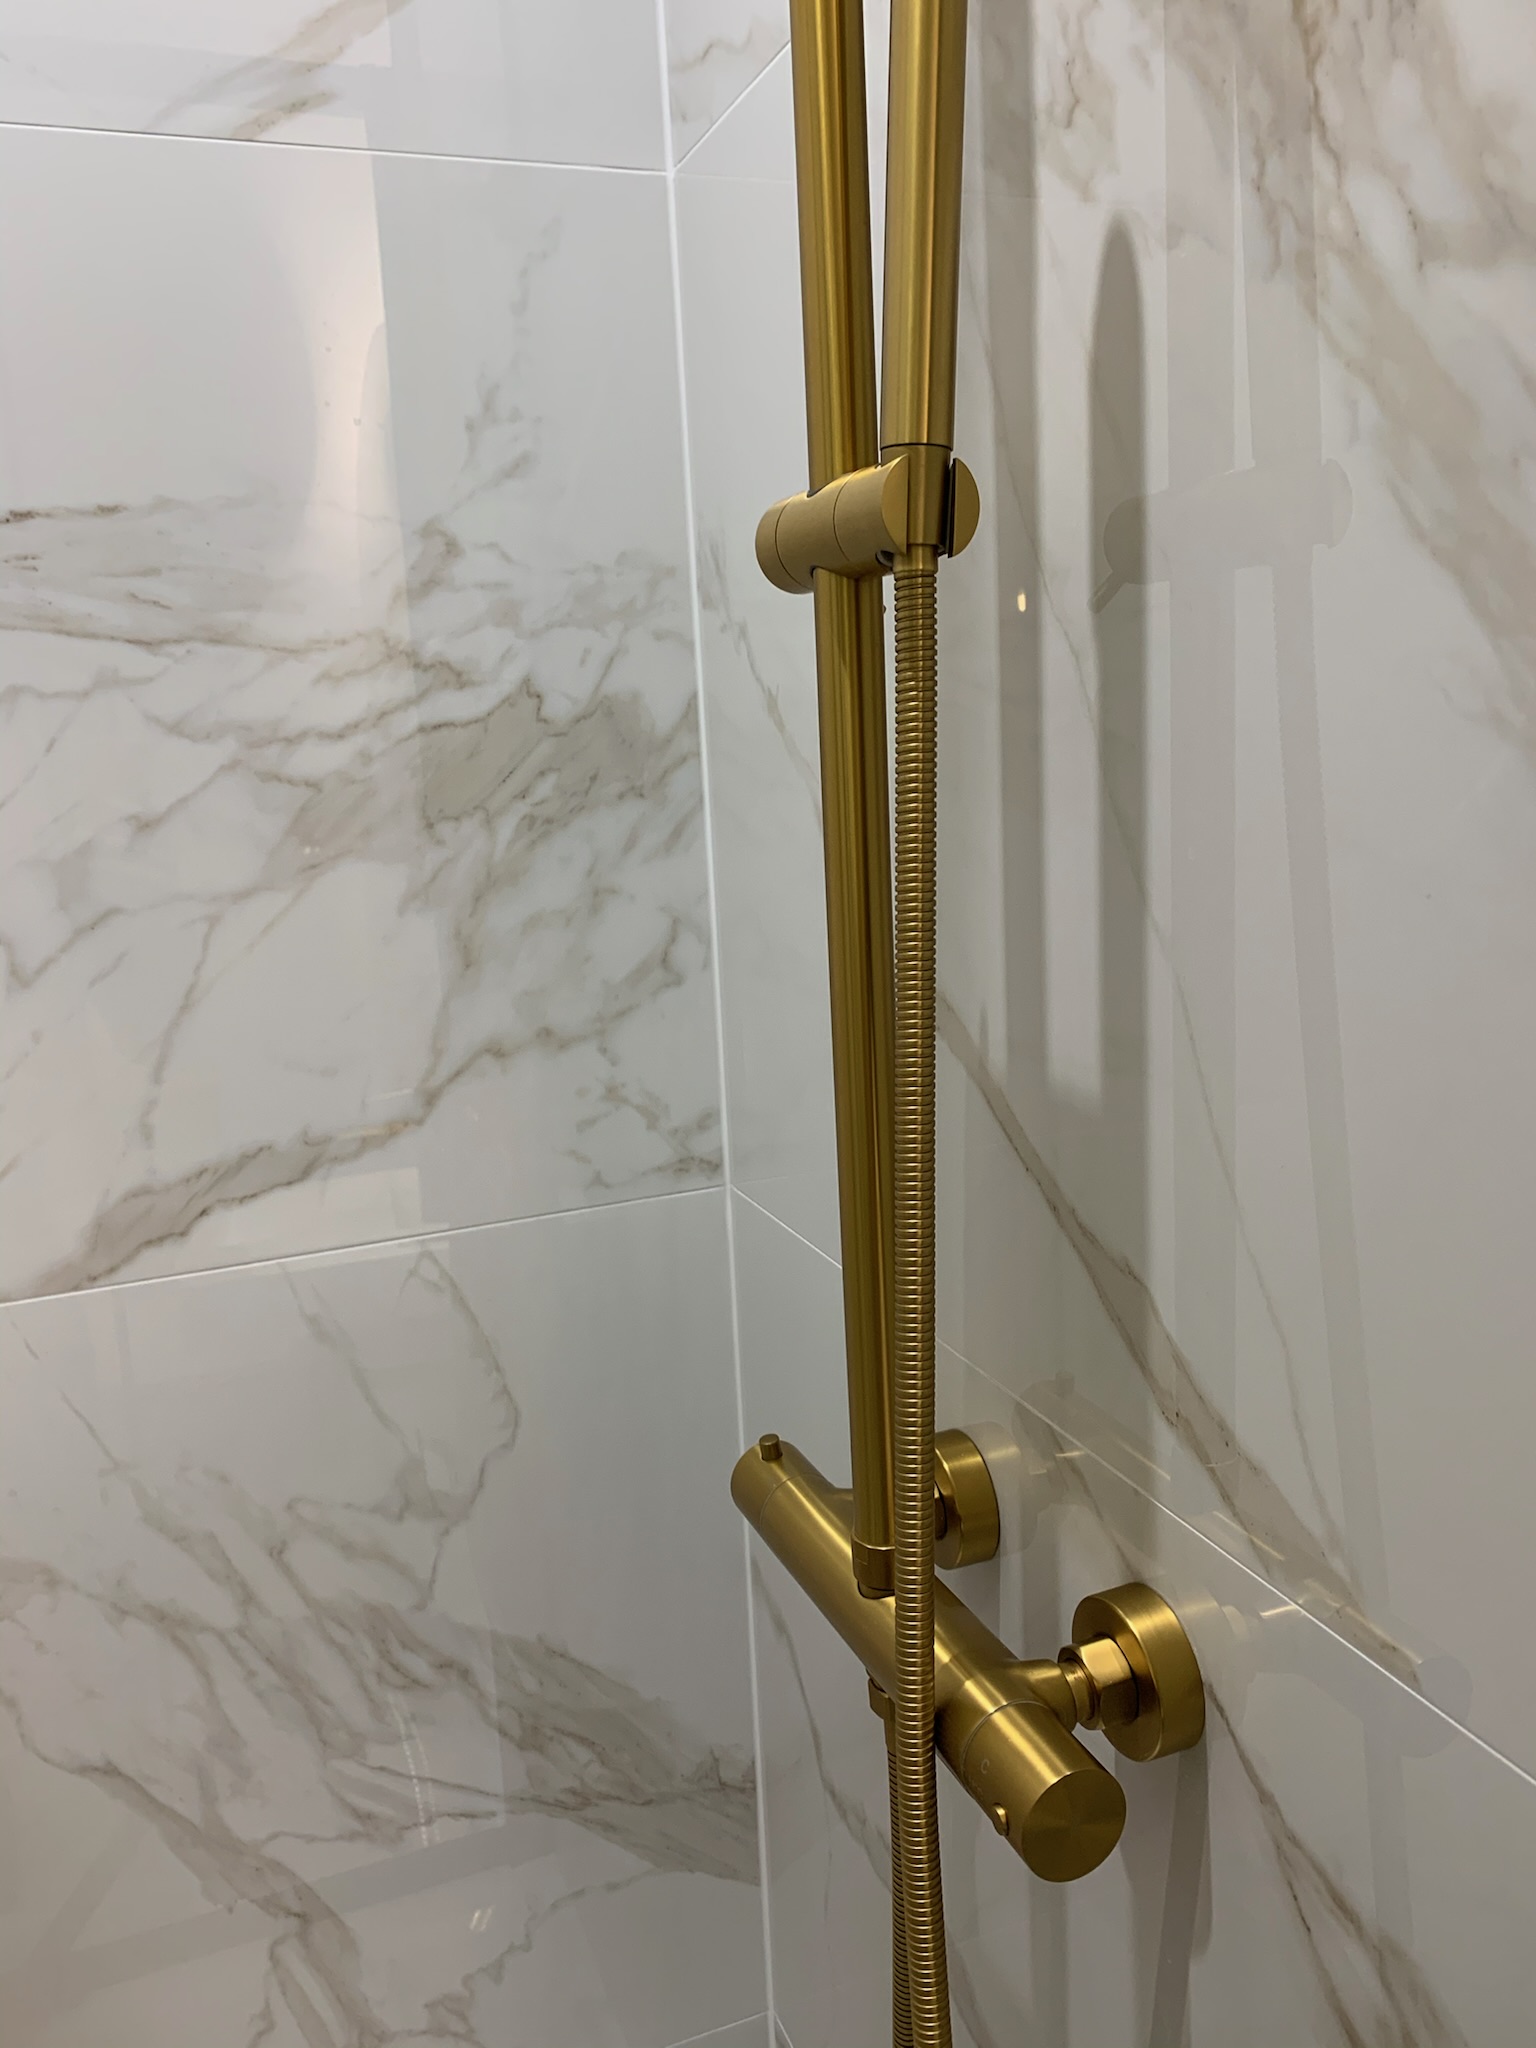 Gold detailing in the bathroom in this eclectic house in Hale